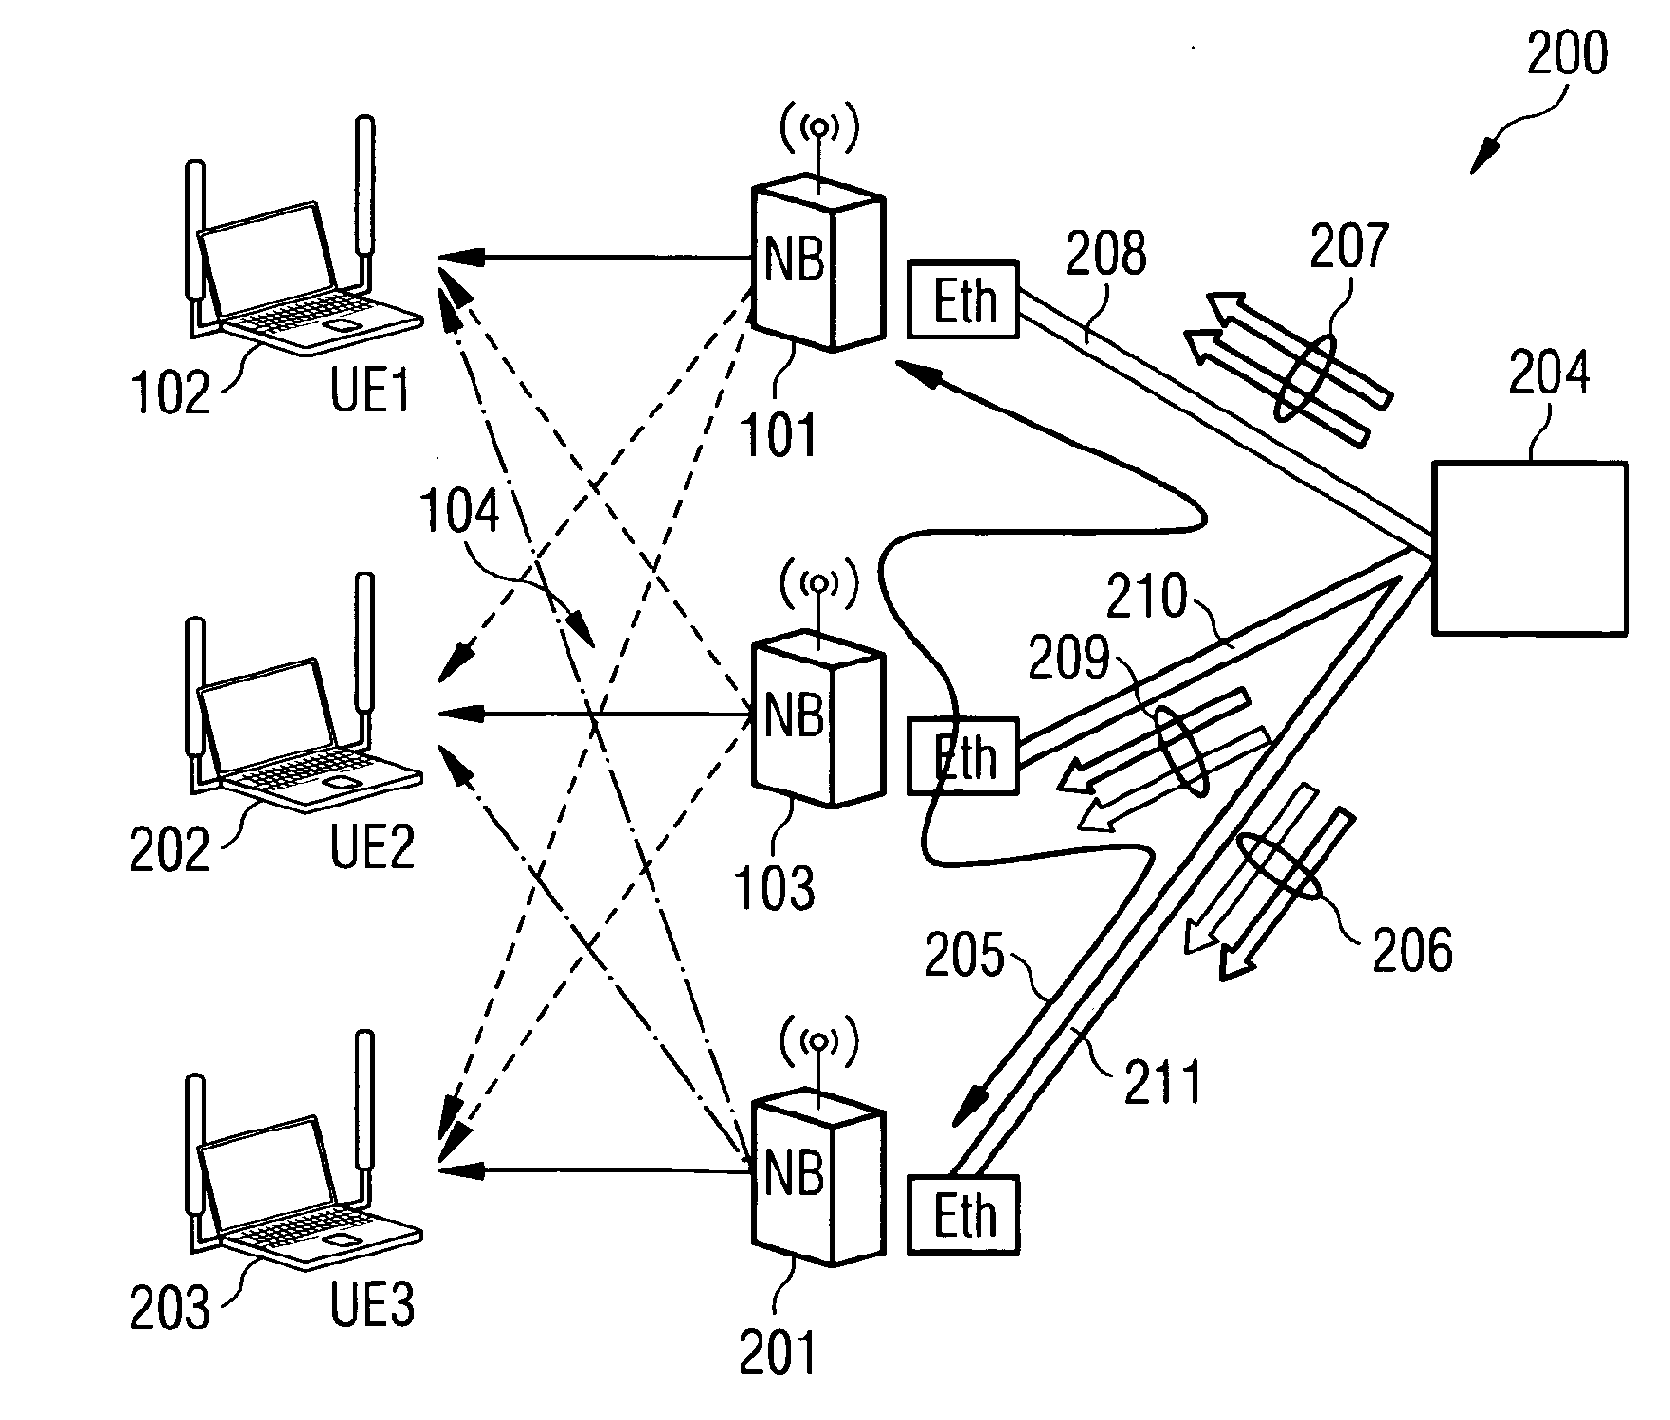 Configuring a communication channel between a base station and a user equipment